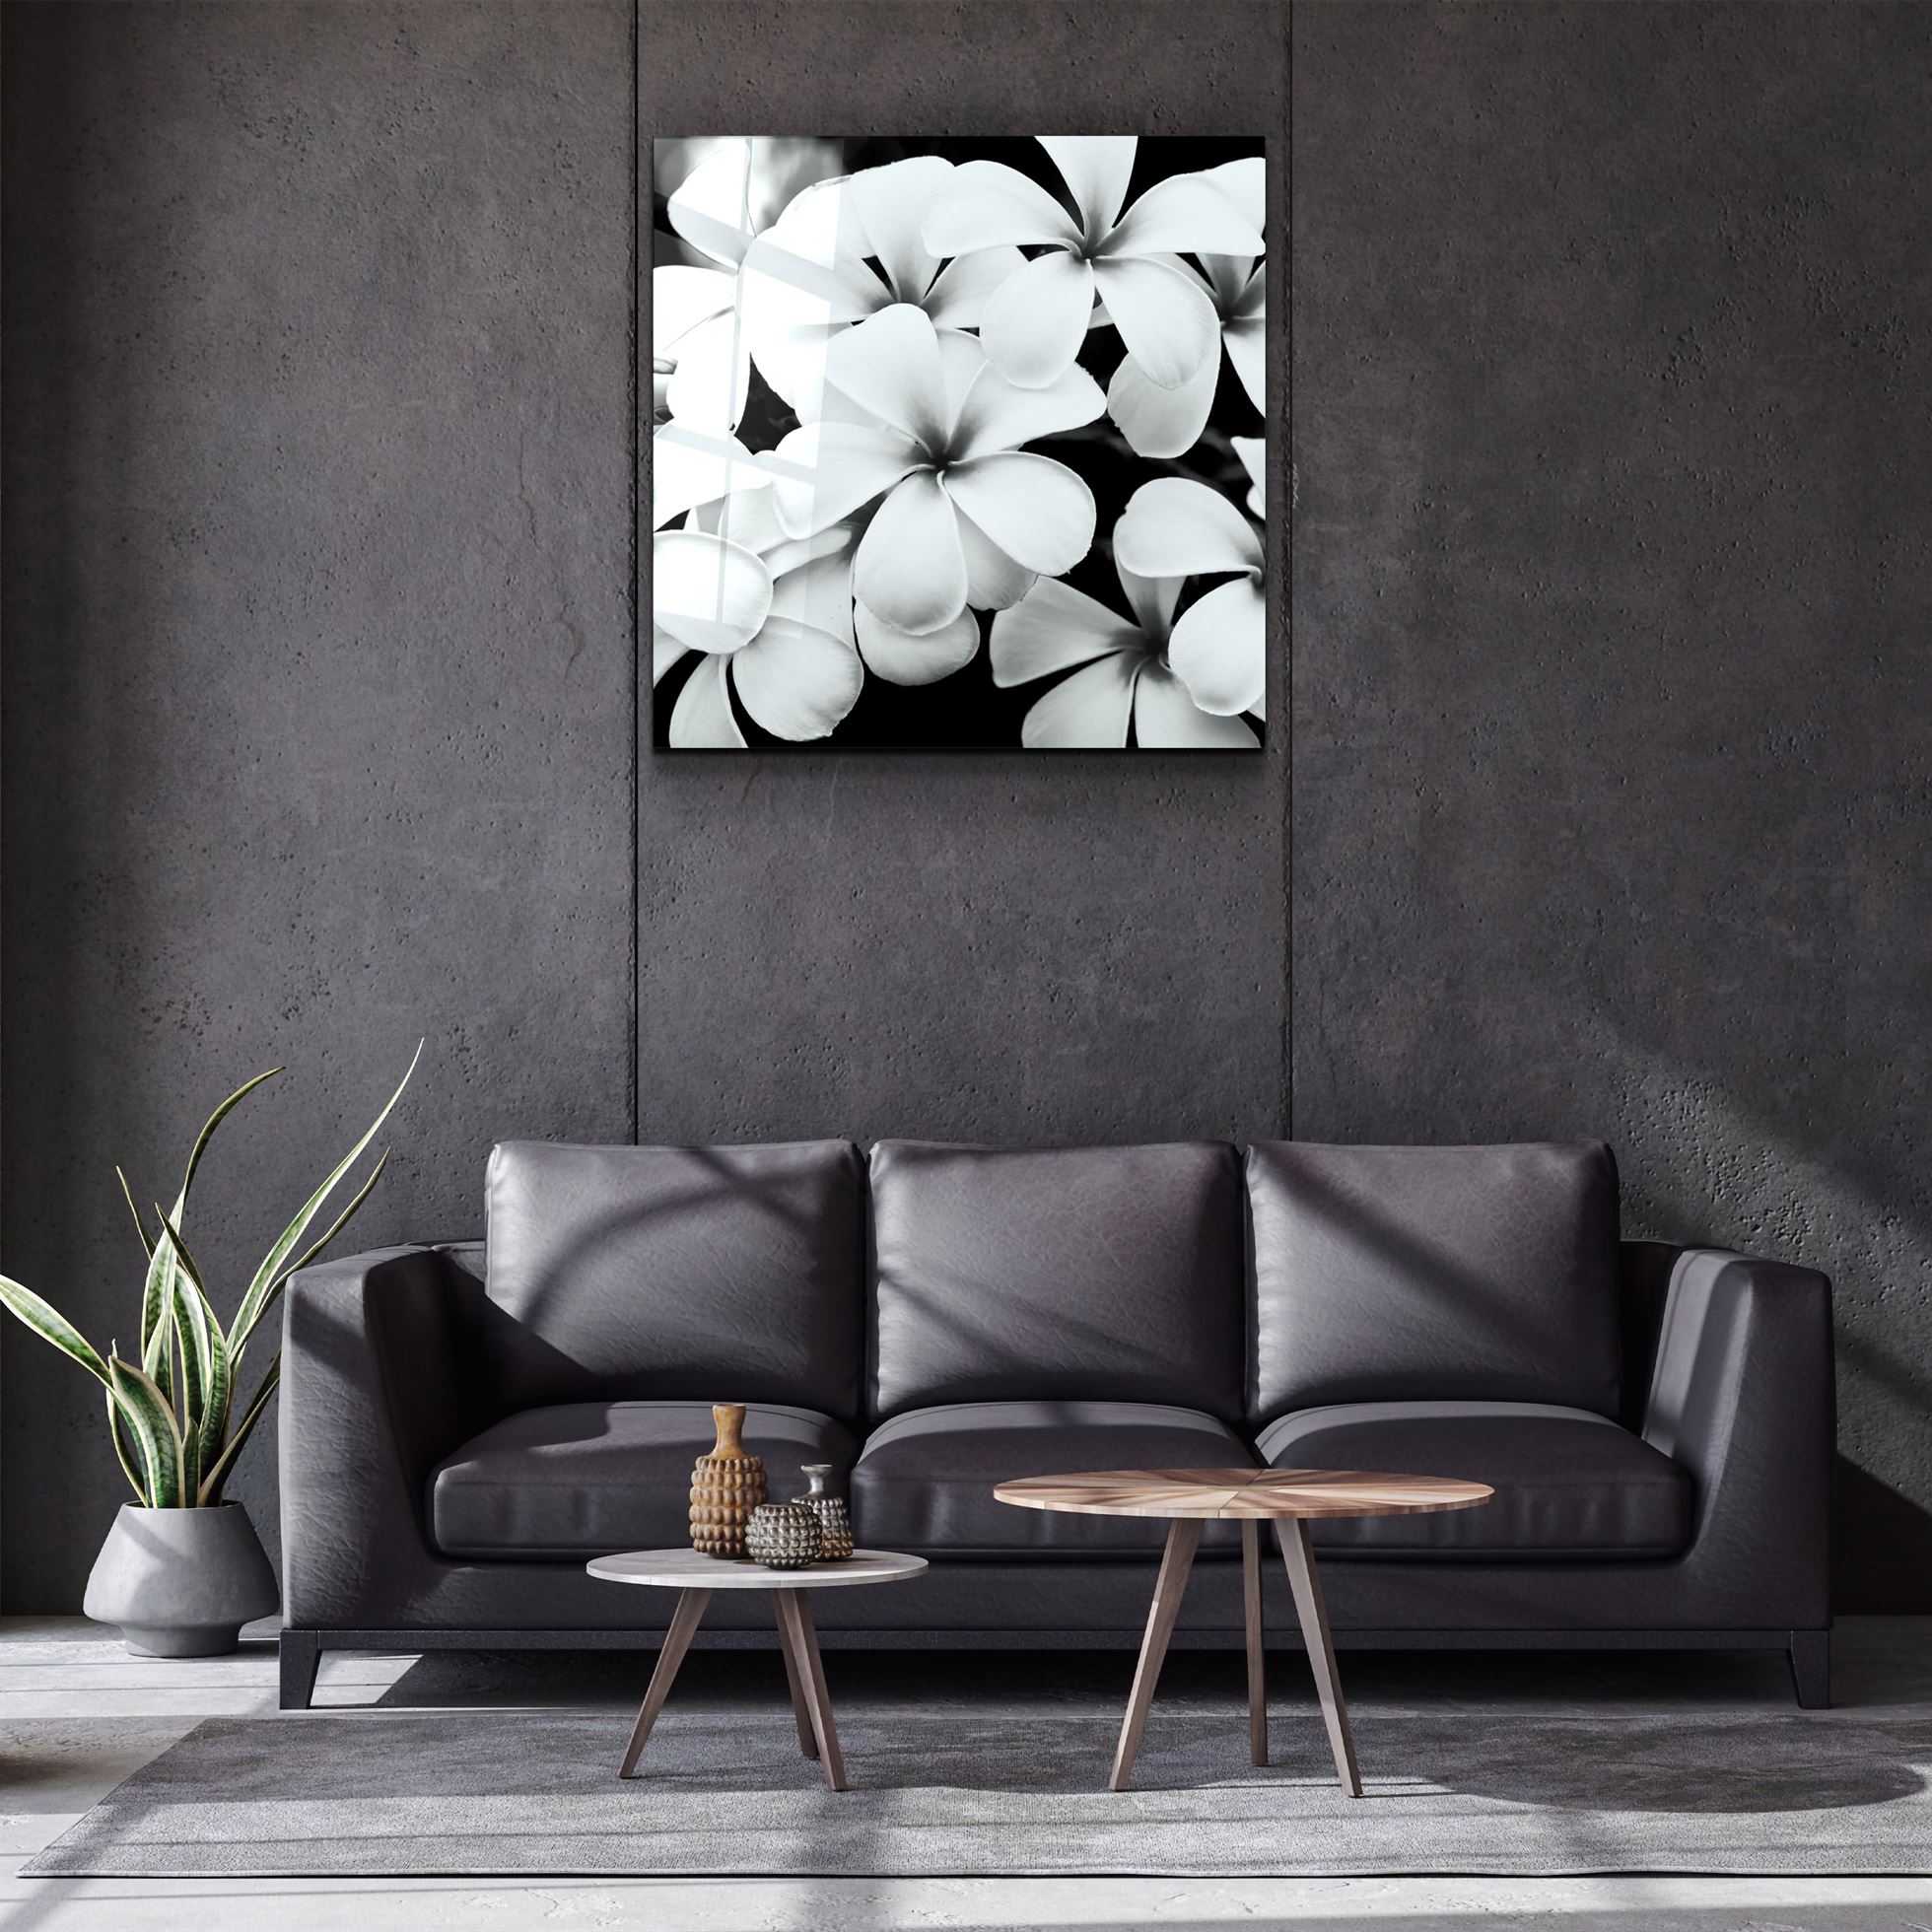 ・"Black and White Flowers"・Glass Wall Art